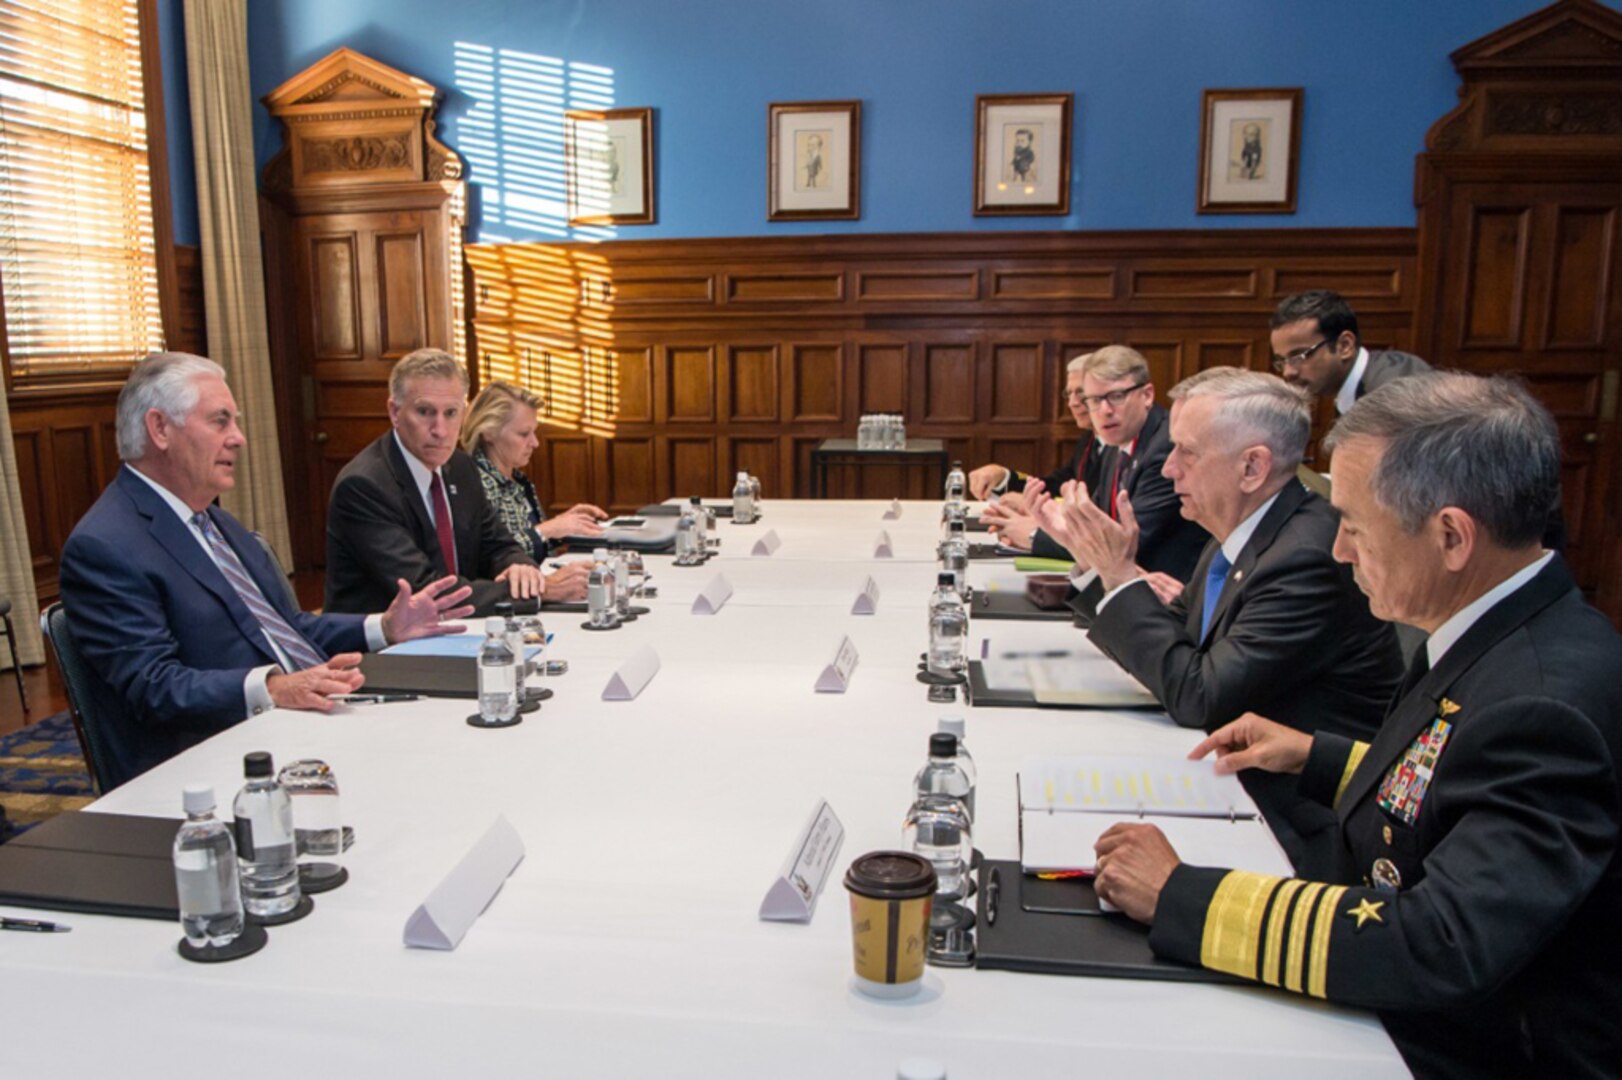 Secretary of Defense Jim Mattis, Chairman of the Joint Chiefs of Staff Gen. Joseph Dunford and Adm. Harry Harris, the commander of U.S. Pacific Command, meet with Secretary of State Rex W. Tillerson and James Carouso, the chargé d'affaires for the U.S. Embassy in Canberra, while visiting Sydney, Australia, June 5, 2017.  